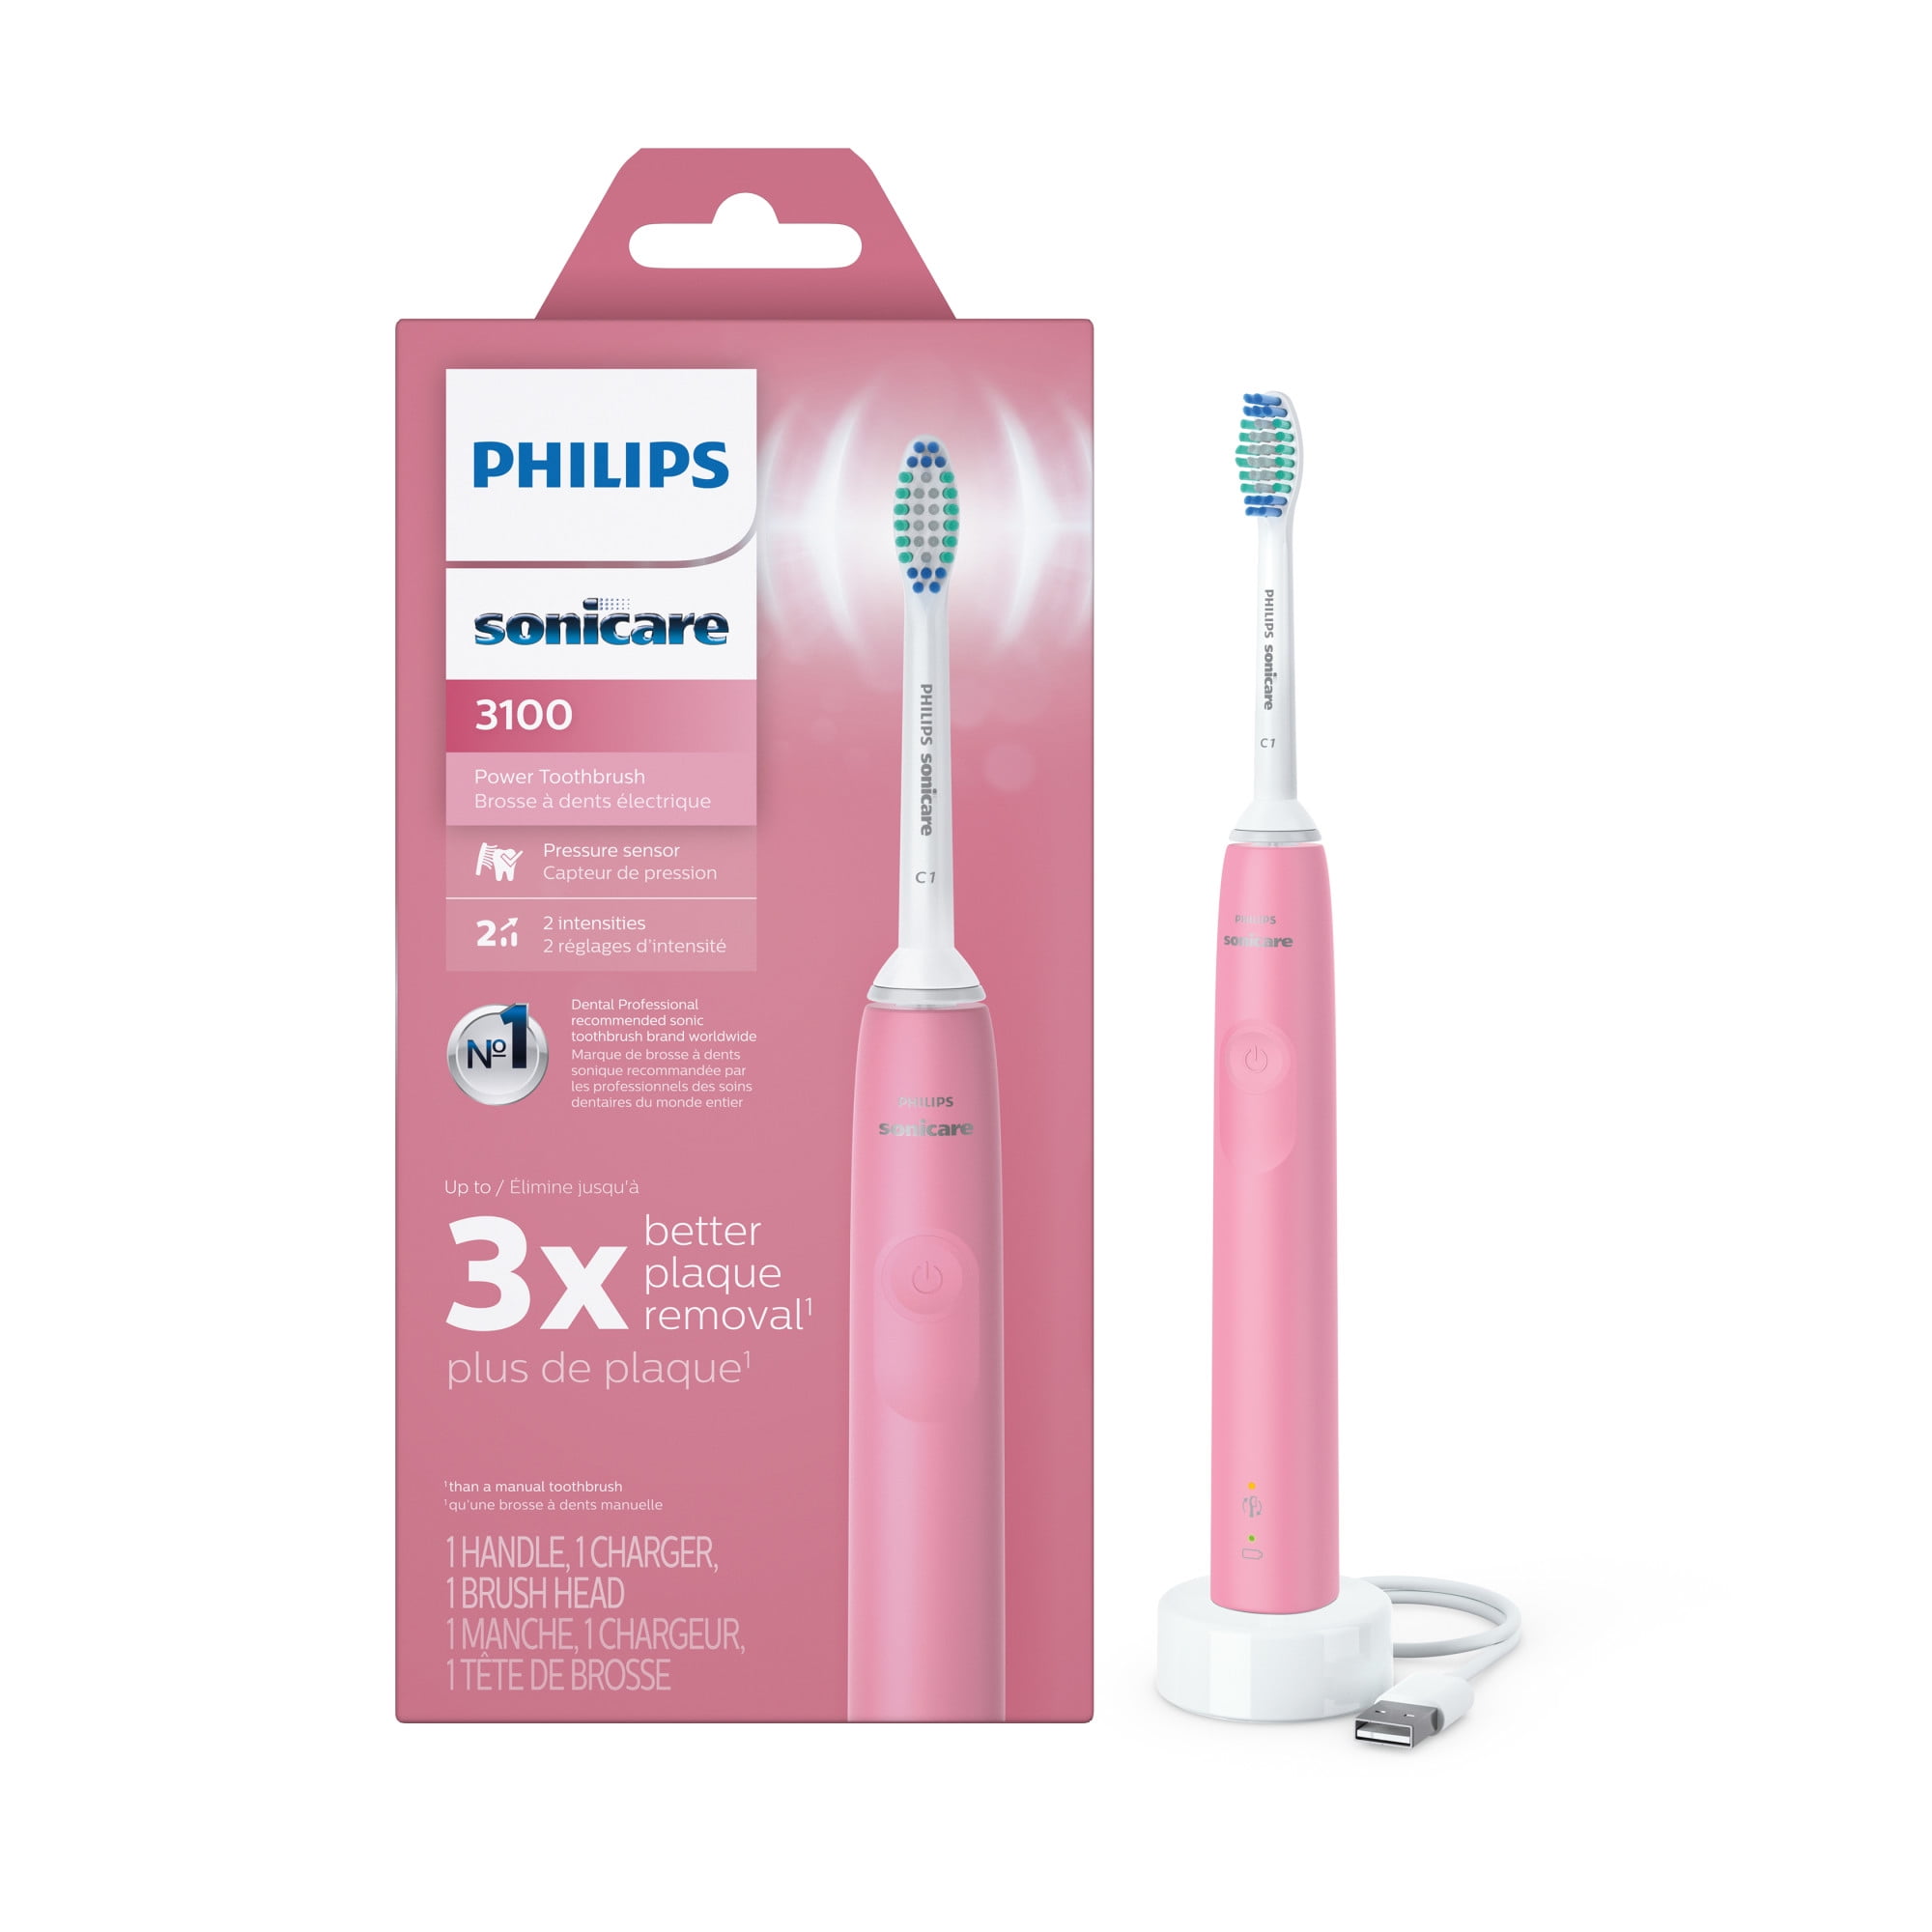 Philips Sonicare 3100 Power Toothbrush, Rechargeable Electric Toothbrush  with Pressure Sensor, Deep Pink HX3681/06